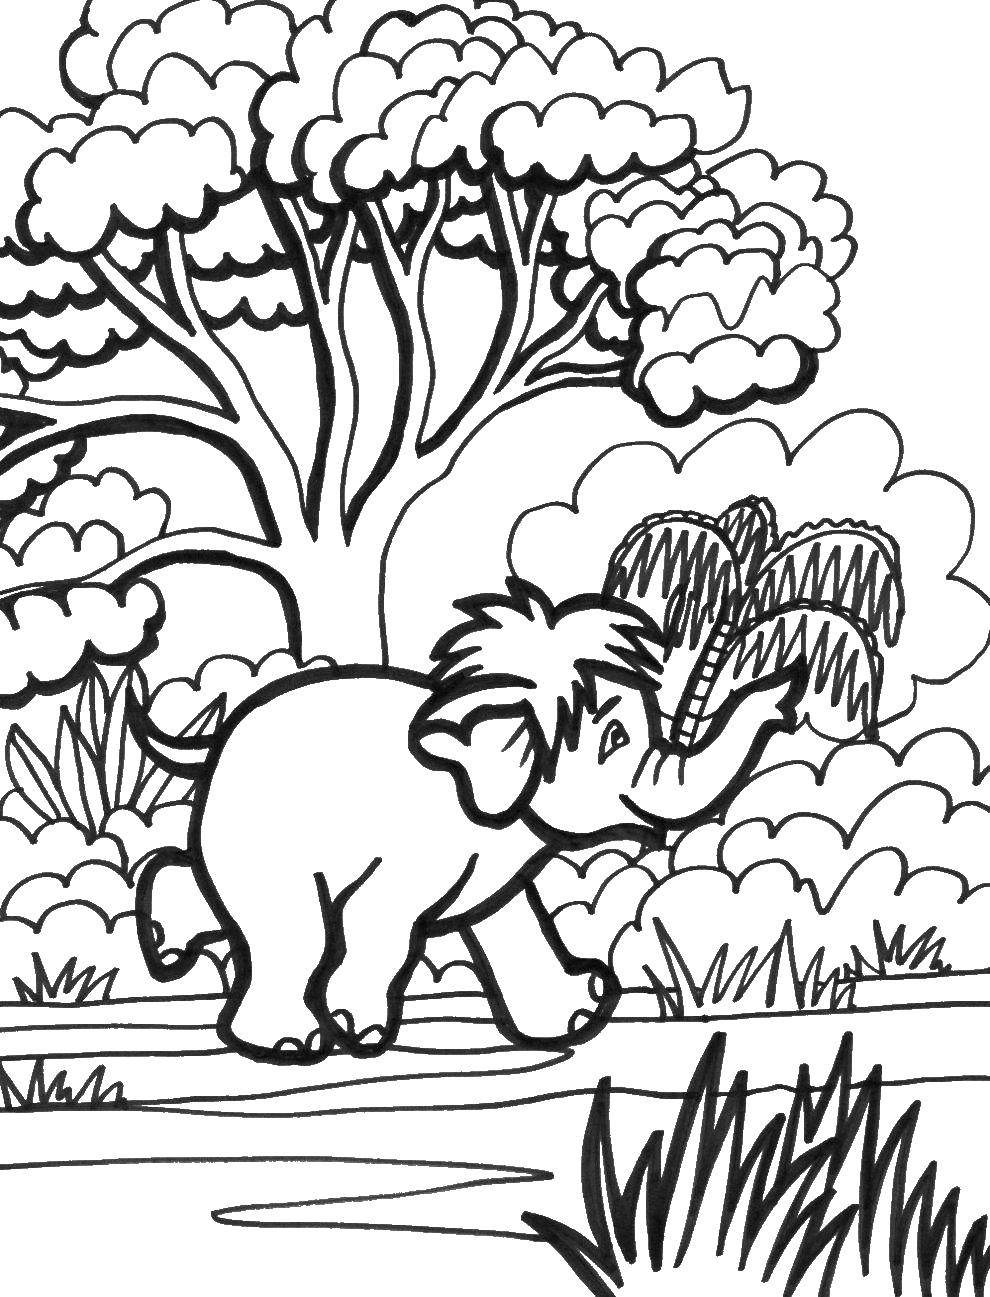 Coloring Mammoth running through the woods. Category animals. Tags:  mammoth.